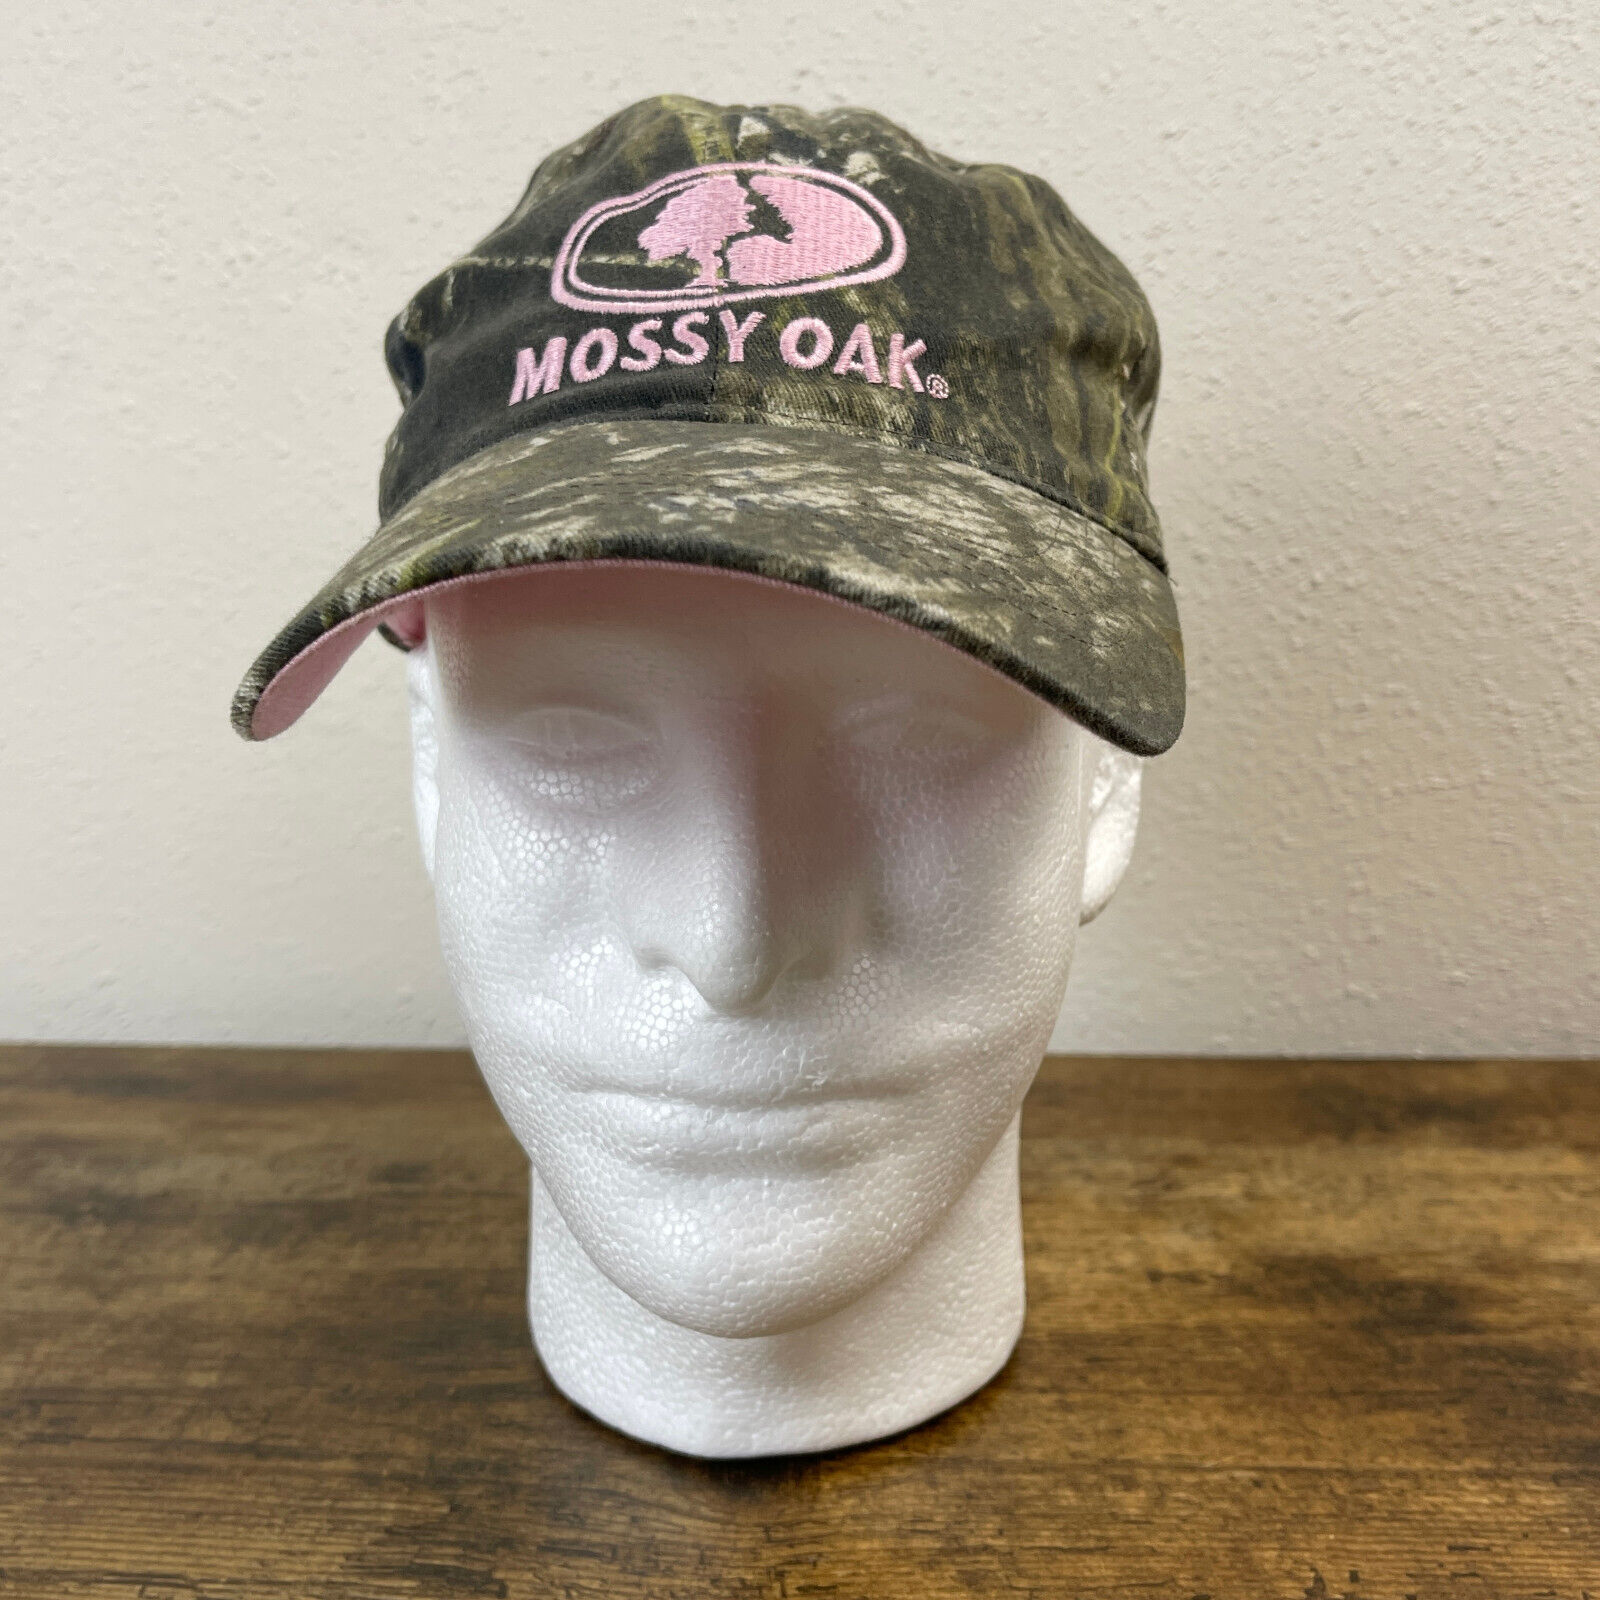 Mossy Oak Pink With Green Brown Camo Trucker Adjustable Hat Cap Adult Casual